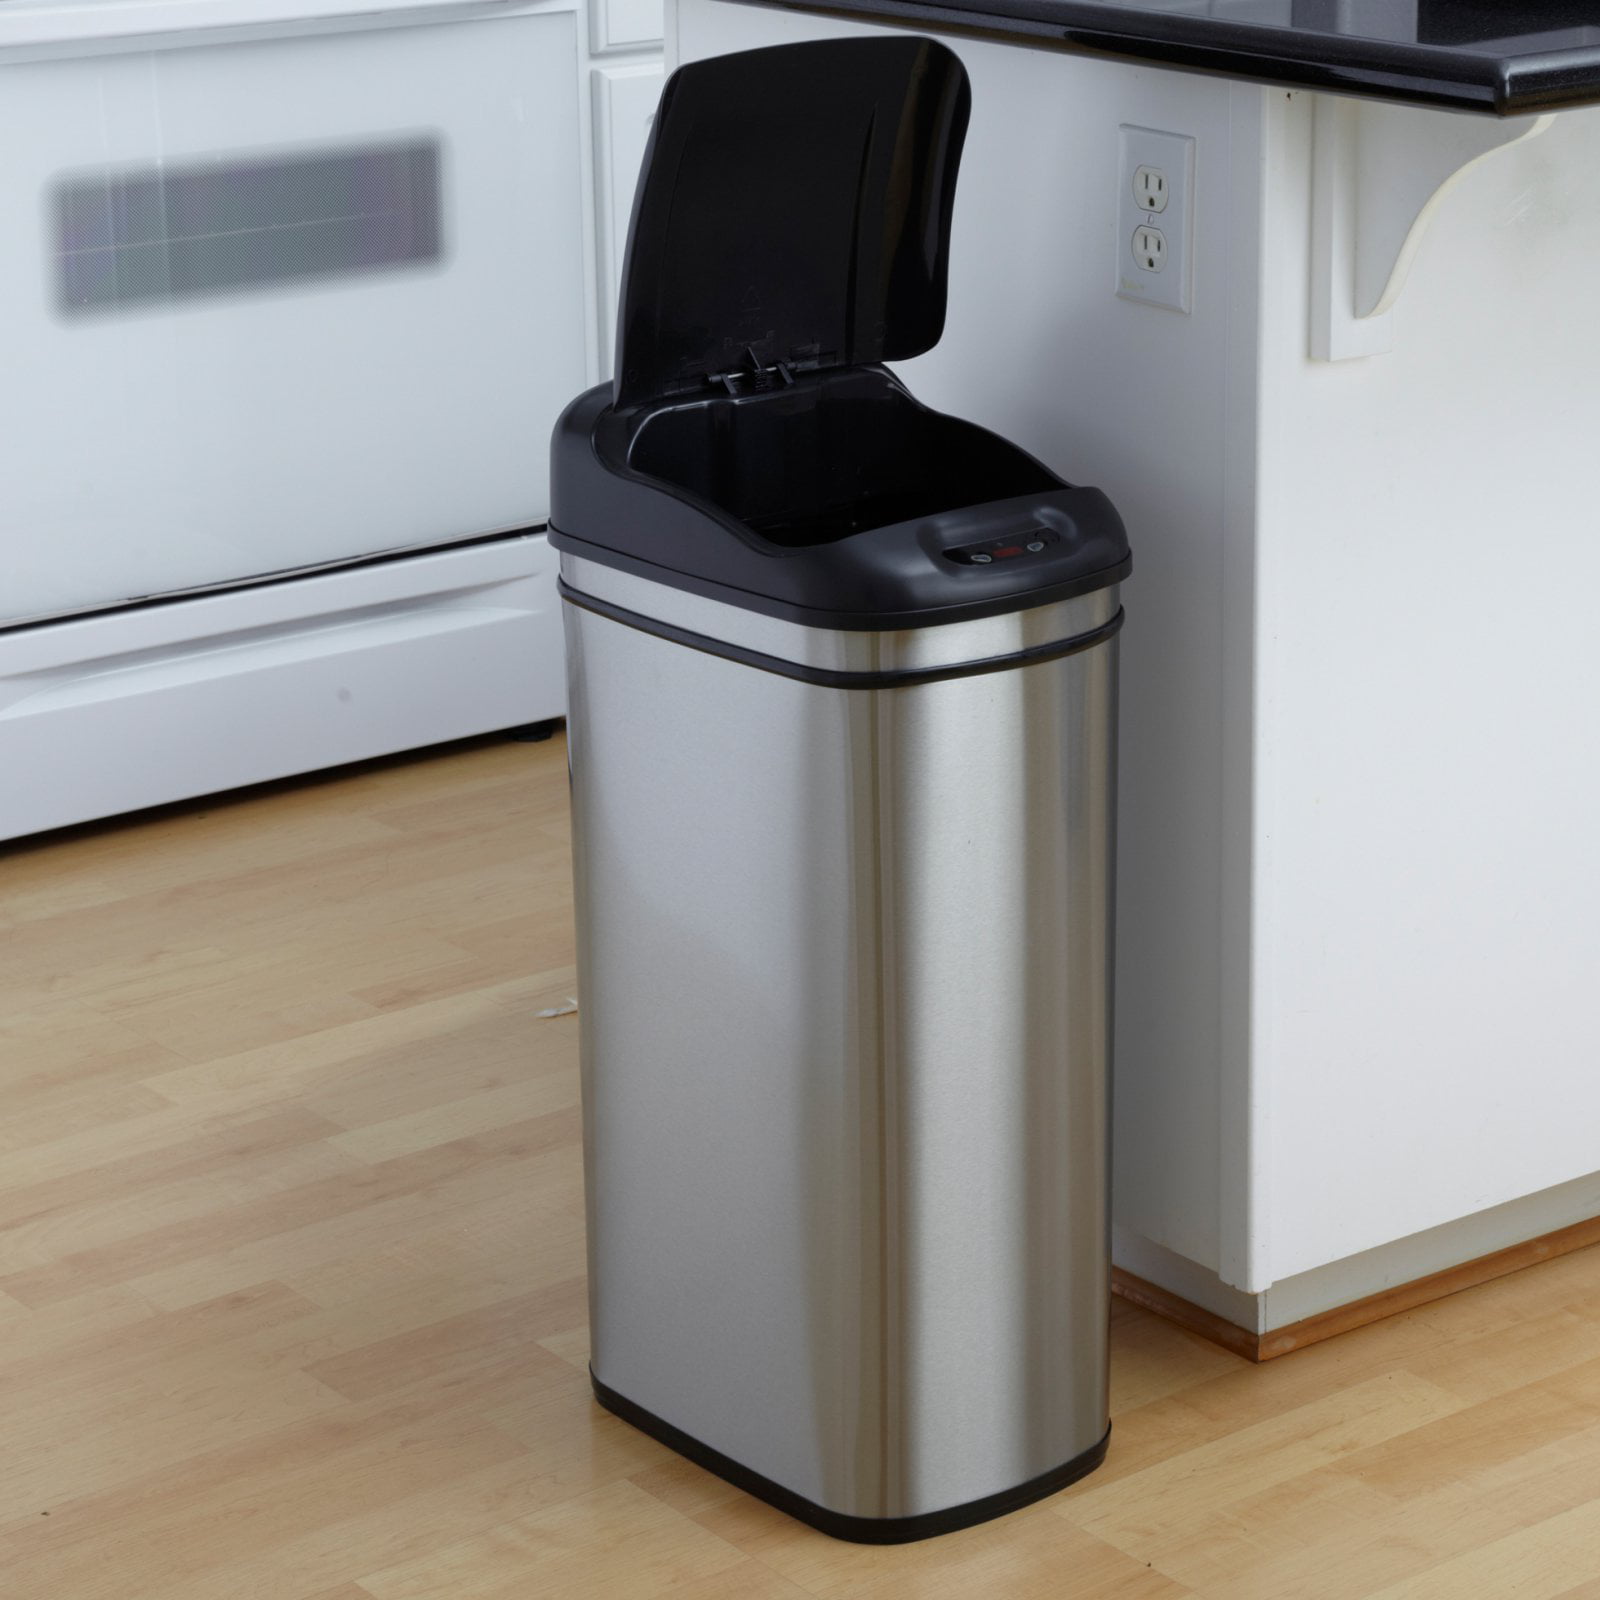 Nine Stars DZT-42-1 Touchless Stainless Steel 11.1 Gallon Trash Can Touchless Stainless Steel Kitchen Trash Can